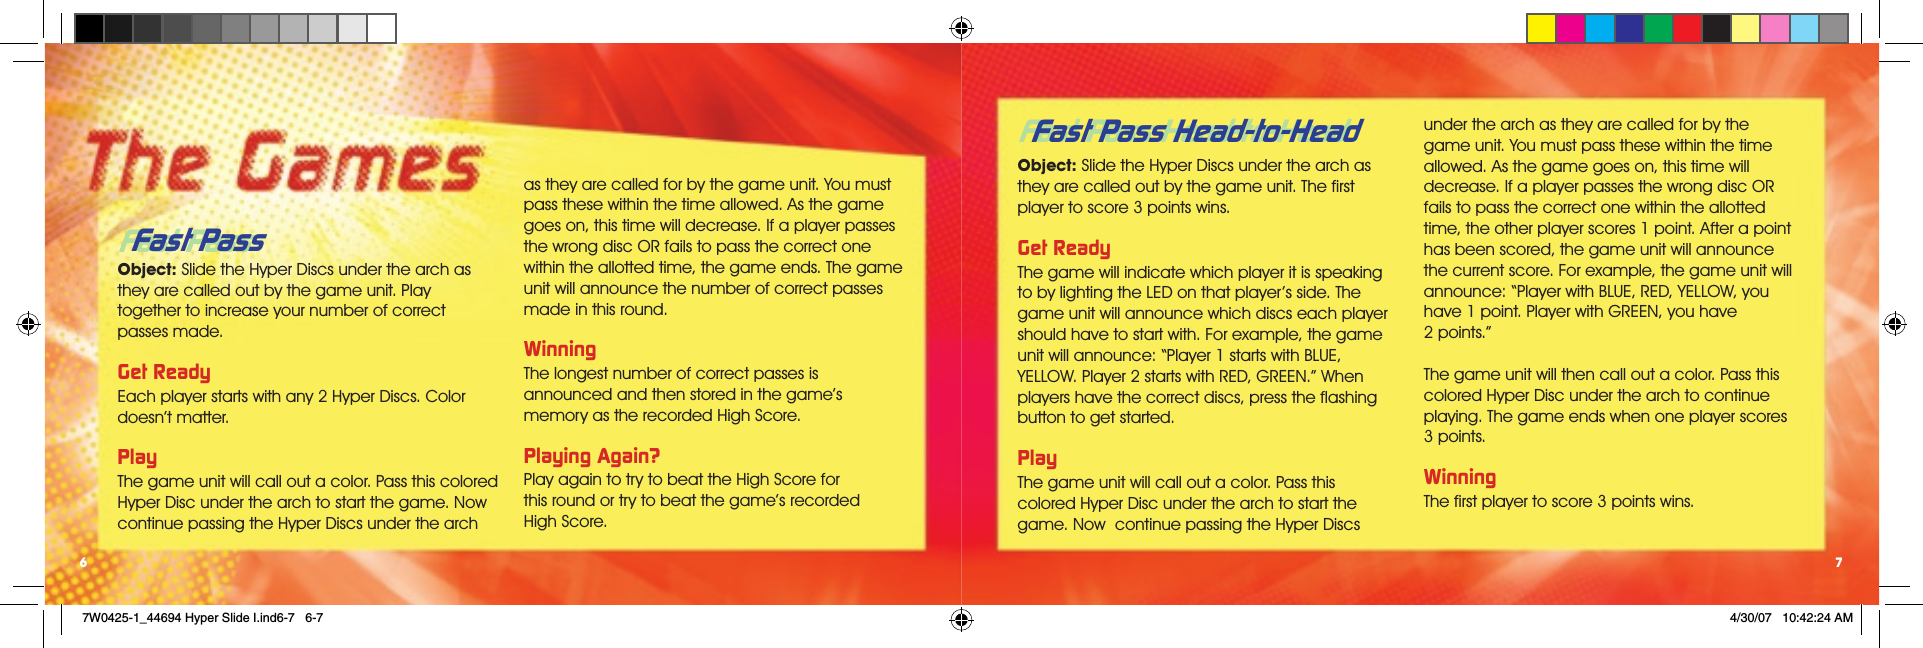 Fast Pass Head-to-HeadObject: Slide the Hyper Discs under the arch as they are called out by the game unit. The ﬁrst player to score 3 points wins. Get ReadyThe game will indicate which player it is speaking to by lighting the LED on that player’s side. The game unit will announce which discs each player should have to start with. For example, the game unit will announce: “Player 1 starts with BLUE, YELLOW. Player 2 starts with RED, GREEN.” When players have the correct discs, press the ﬂashing button to get started.PlayThe game unit will call out a color. Pass this  colored Hyper Disc under the arch to start the game. Now  continue passing the Hyper Discs under the arch as they are called for by the  game unit. You must pass these within the time allowed. As the game goes on, this time will decrease. If a player passes the wrong disc OR fails to pass the correct one within the allotted time, the other player scores 1 point. After a point has been scored, the game unit will announce the current score. For example, the game unit will announce: “Player with BLUE, RED, YELLOW, you have 1 point. Player with GREEN, you have  2 points.”The game unit will then call out a color. Pass this colored Hyper Disc under the arch to continue playing. The game ends when one player scores 3 points.  WinningThe ﬁrst player to score 3 points wins.7Fast Pass Object: Slide the Hyper Discs under the arch as they are called out by the game unit. Play  together to increase your number of correct passes made. Get ReadyEach player starts with any 2 Hyper Discs. Color doesn’t matter. PlayThe game unit will call out a color. Pass this colored Hyper Disc under the arch to start the game. Now continue passing the Hyper Discs under the arch as they are called for by the game unit. You must pass these within the time allowed. As the game goes on, this time will decrease. If a player passes the wrong disc OR fails to pass the correct one within the allotted time, the game ends. The game unit will announce the number of correct passes made in this round.WinningThe longest number of correct passes is announced and then stored in the game’s memory as the recorded High Score.Playing Again?Play again to try to beat the High Score for  this round or try to beat the game’s recorded  High Score. 6Fast Pass Head-to-HeadFast Pass 7W0425-1_44694 Hyper Slide I.ind6-7   6-7 4/30/07   10:42:24 AM